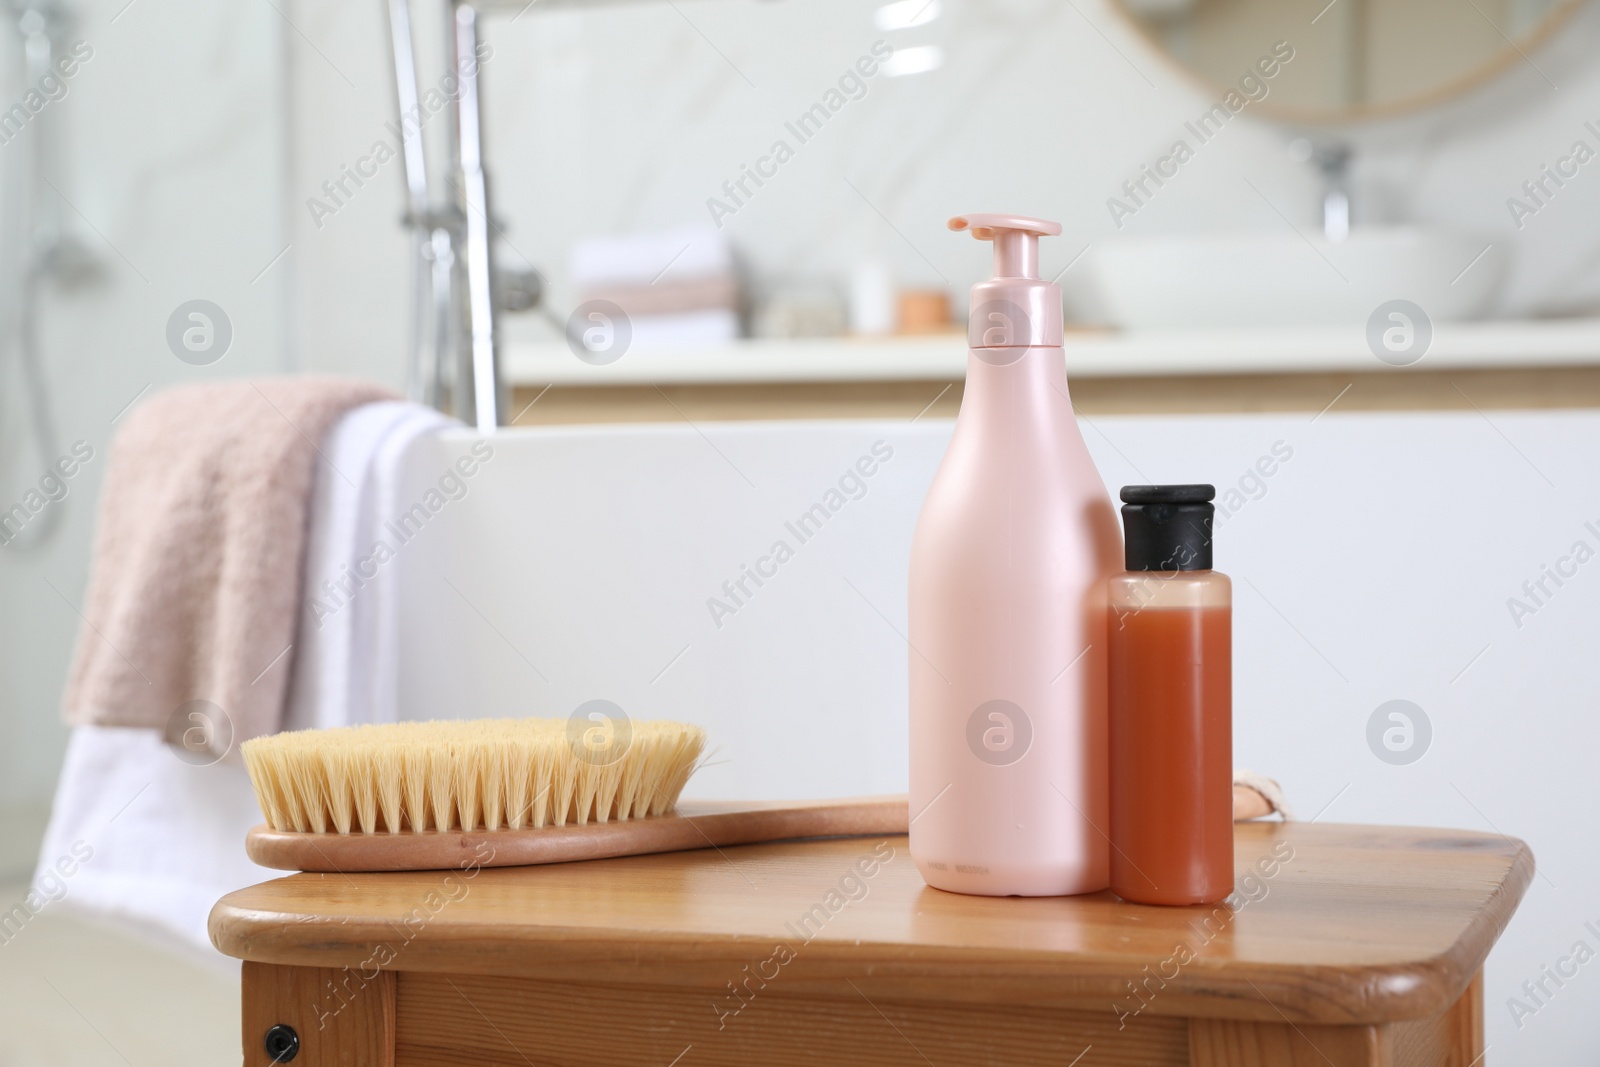 Photo of Bottles of shower gels and brush on wooden table near tub in bathroom, space for text